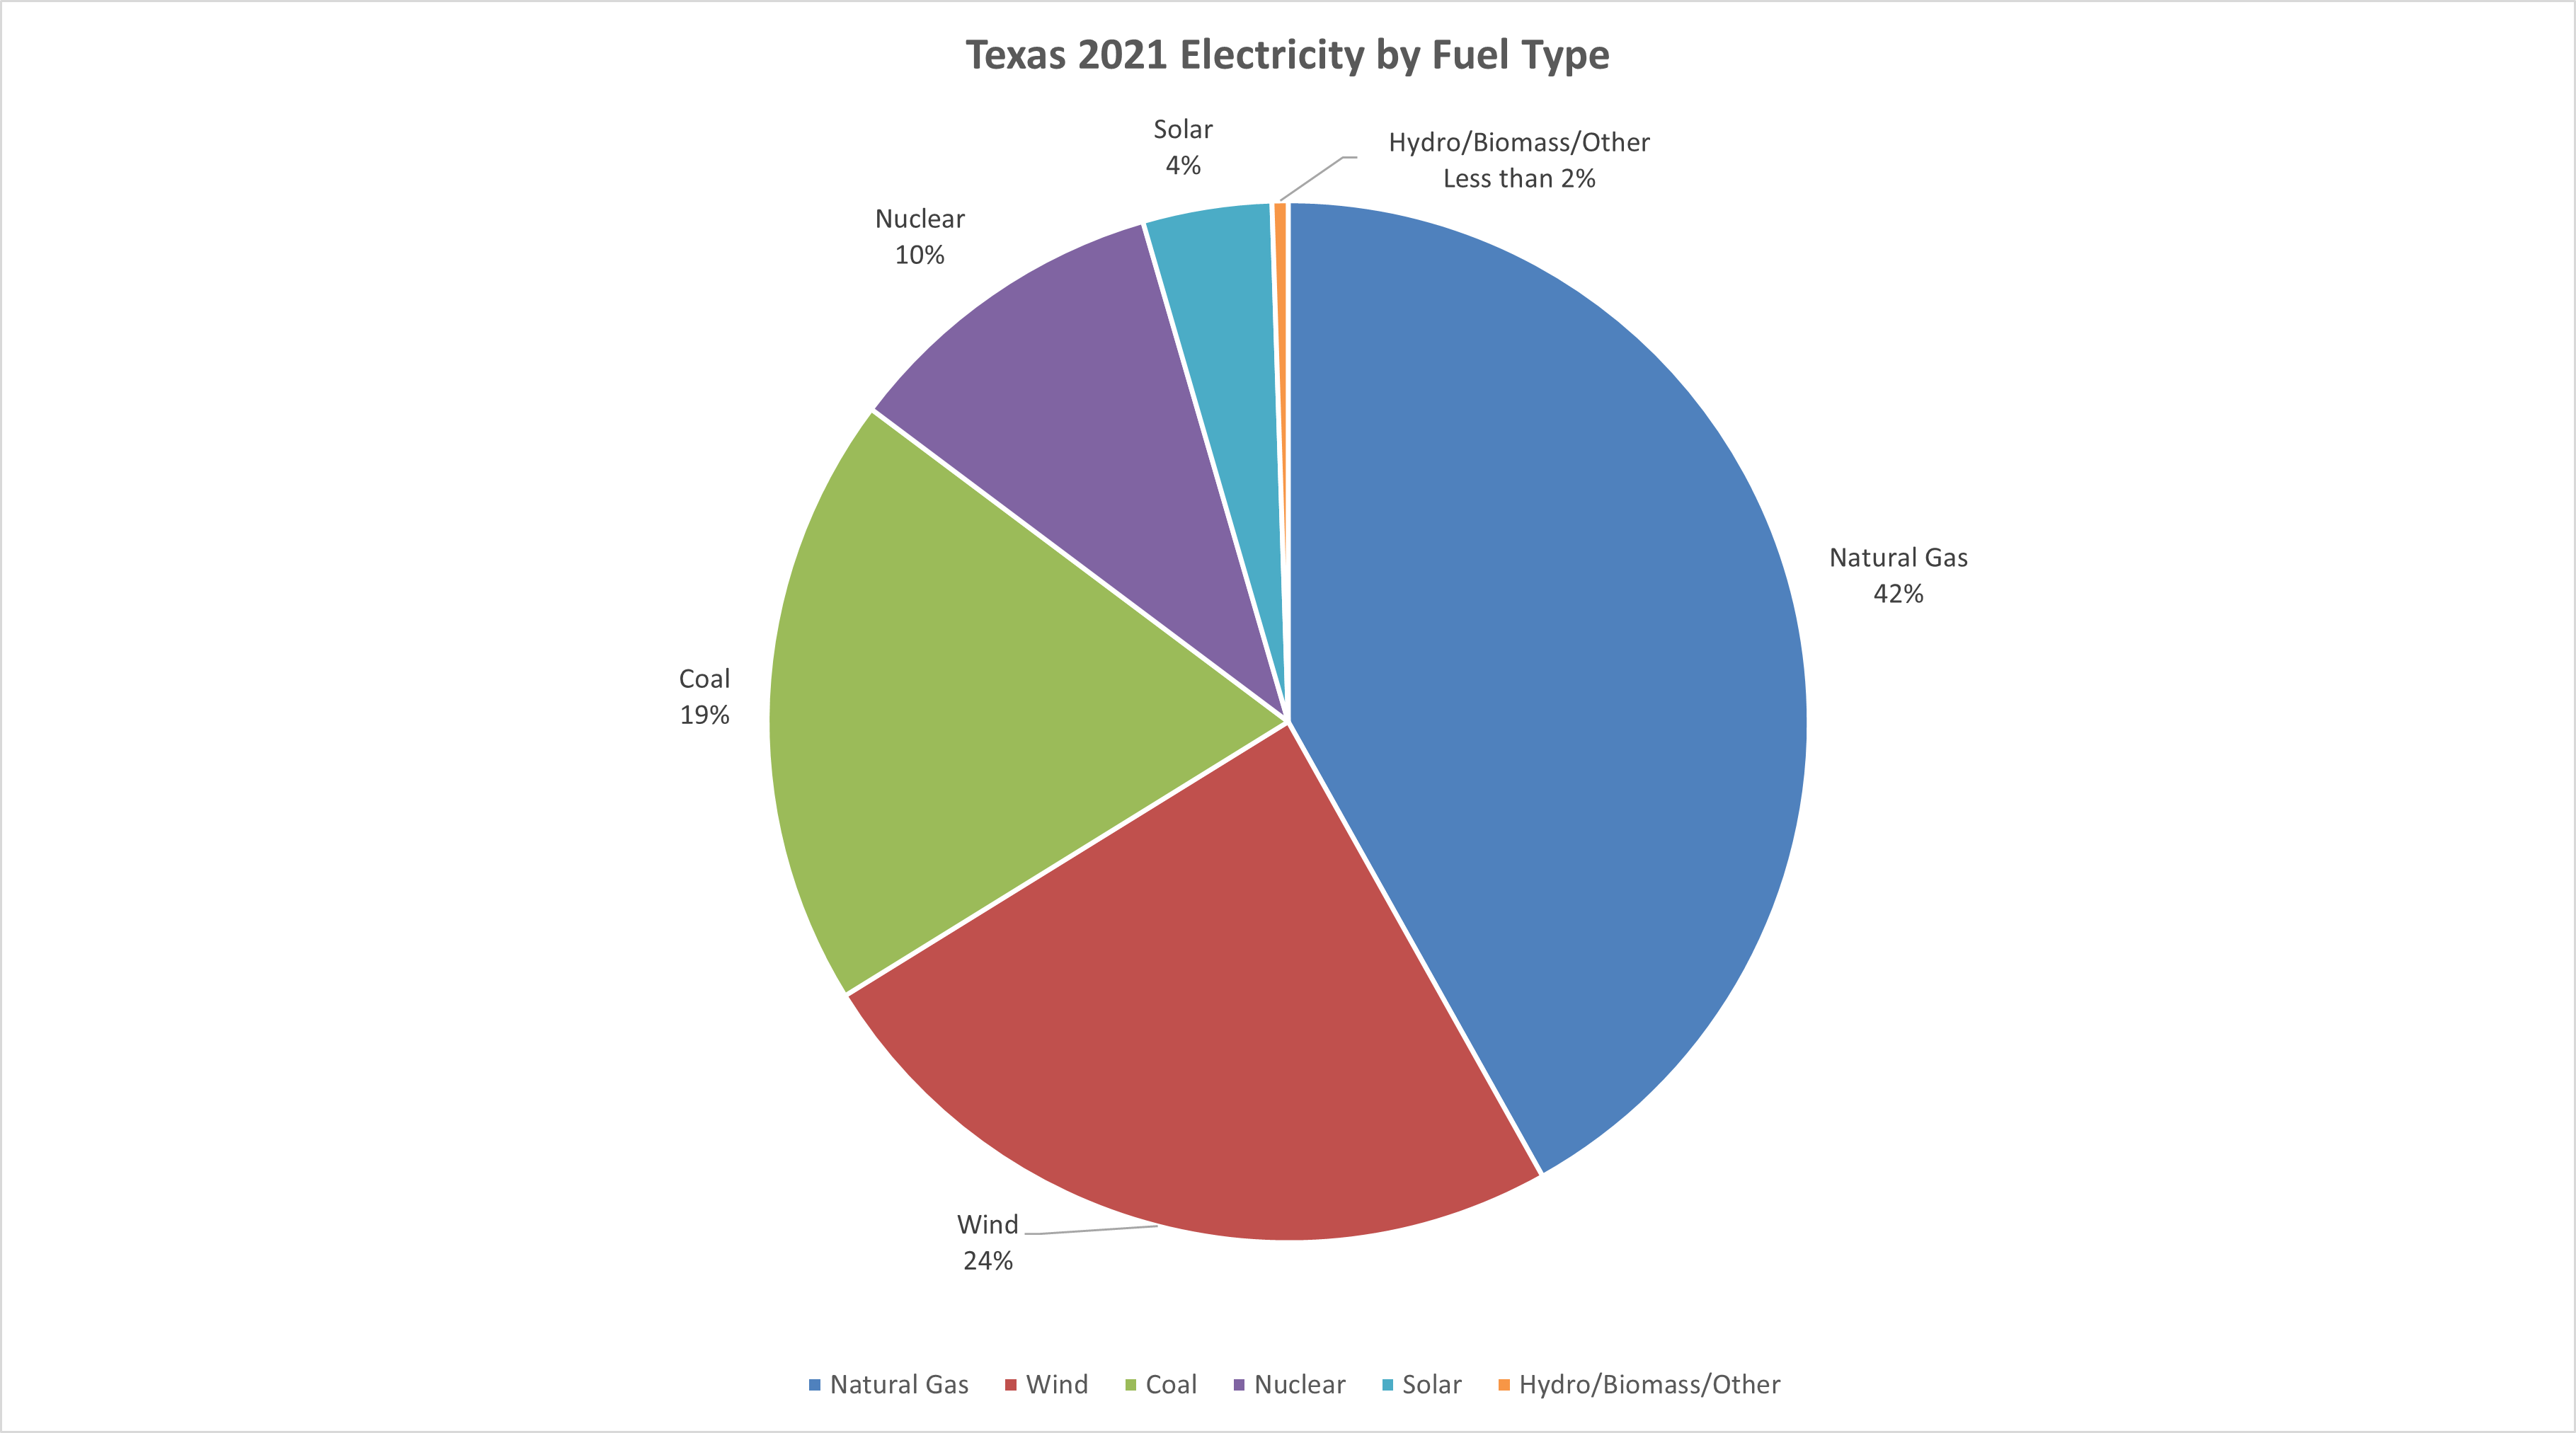 graph showing texas electricity generation by fuel type in 2021